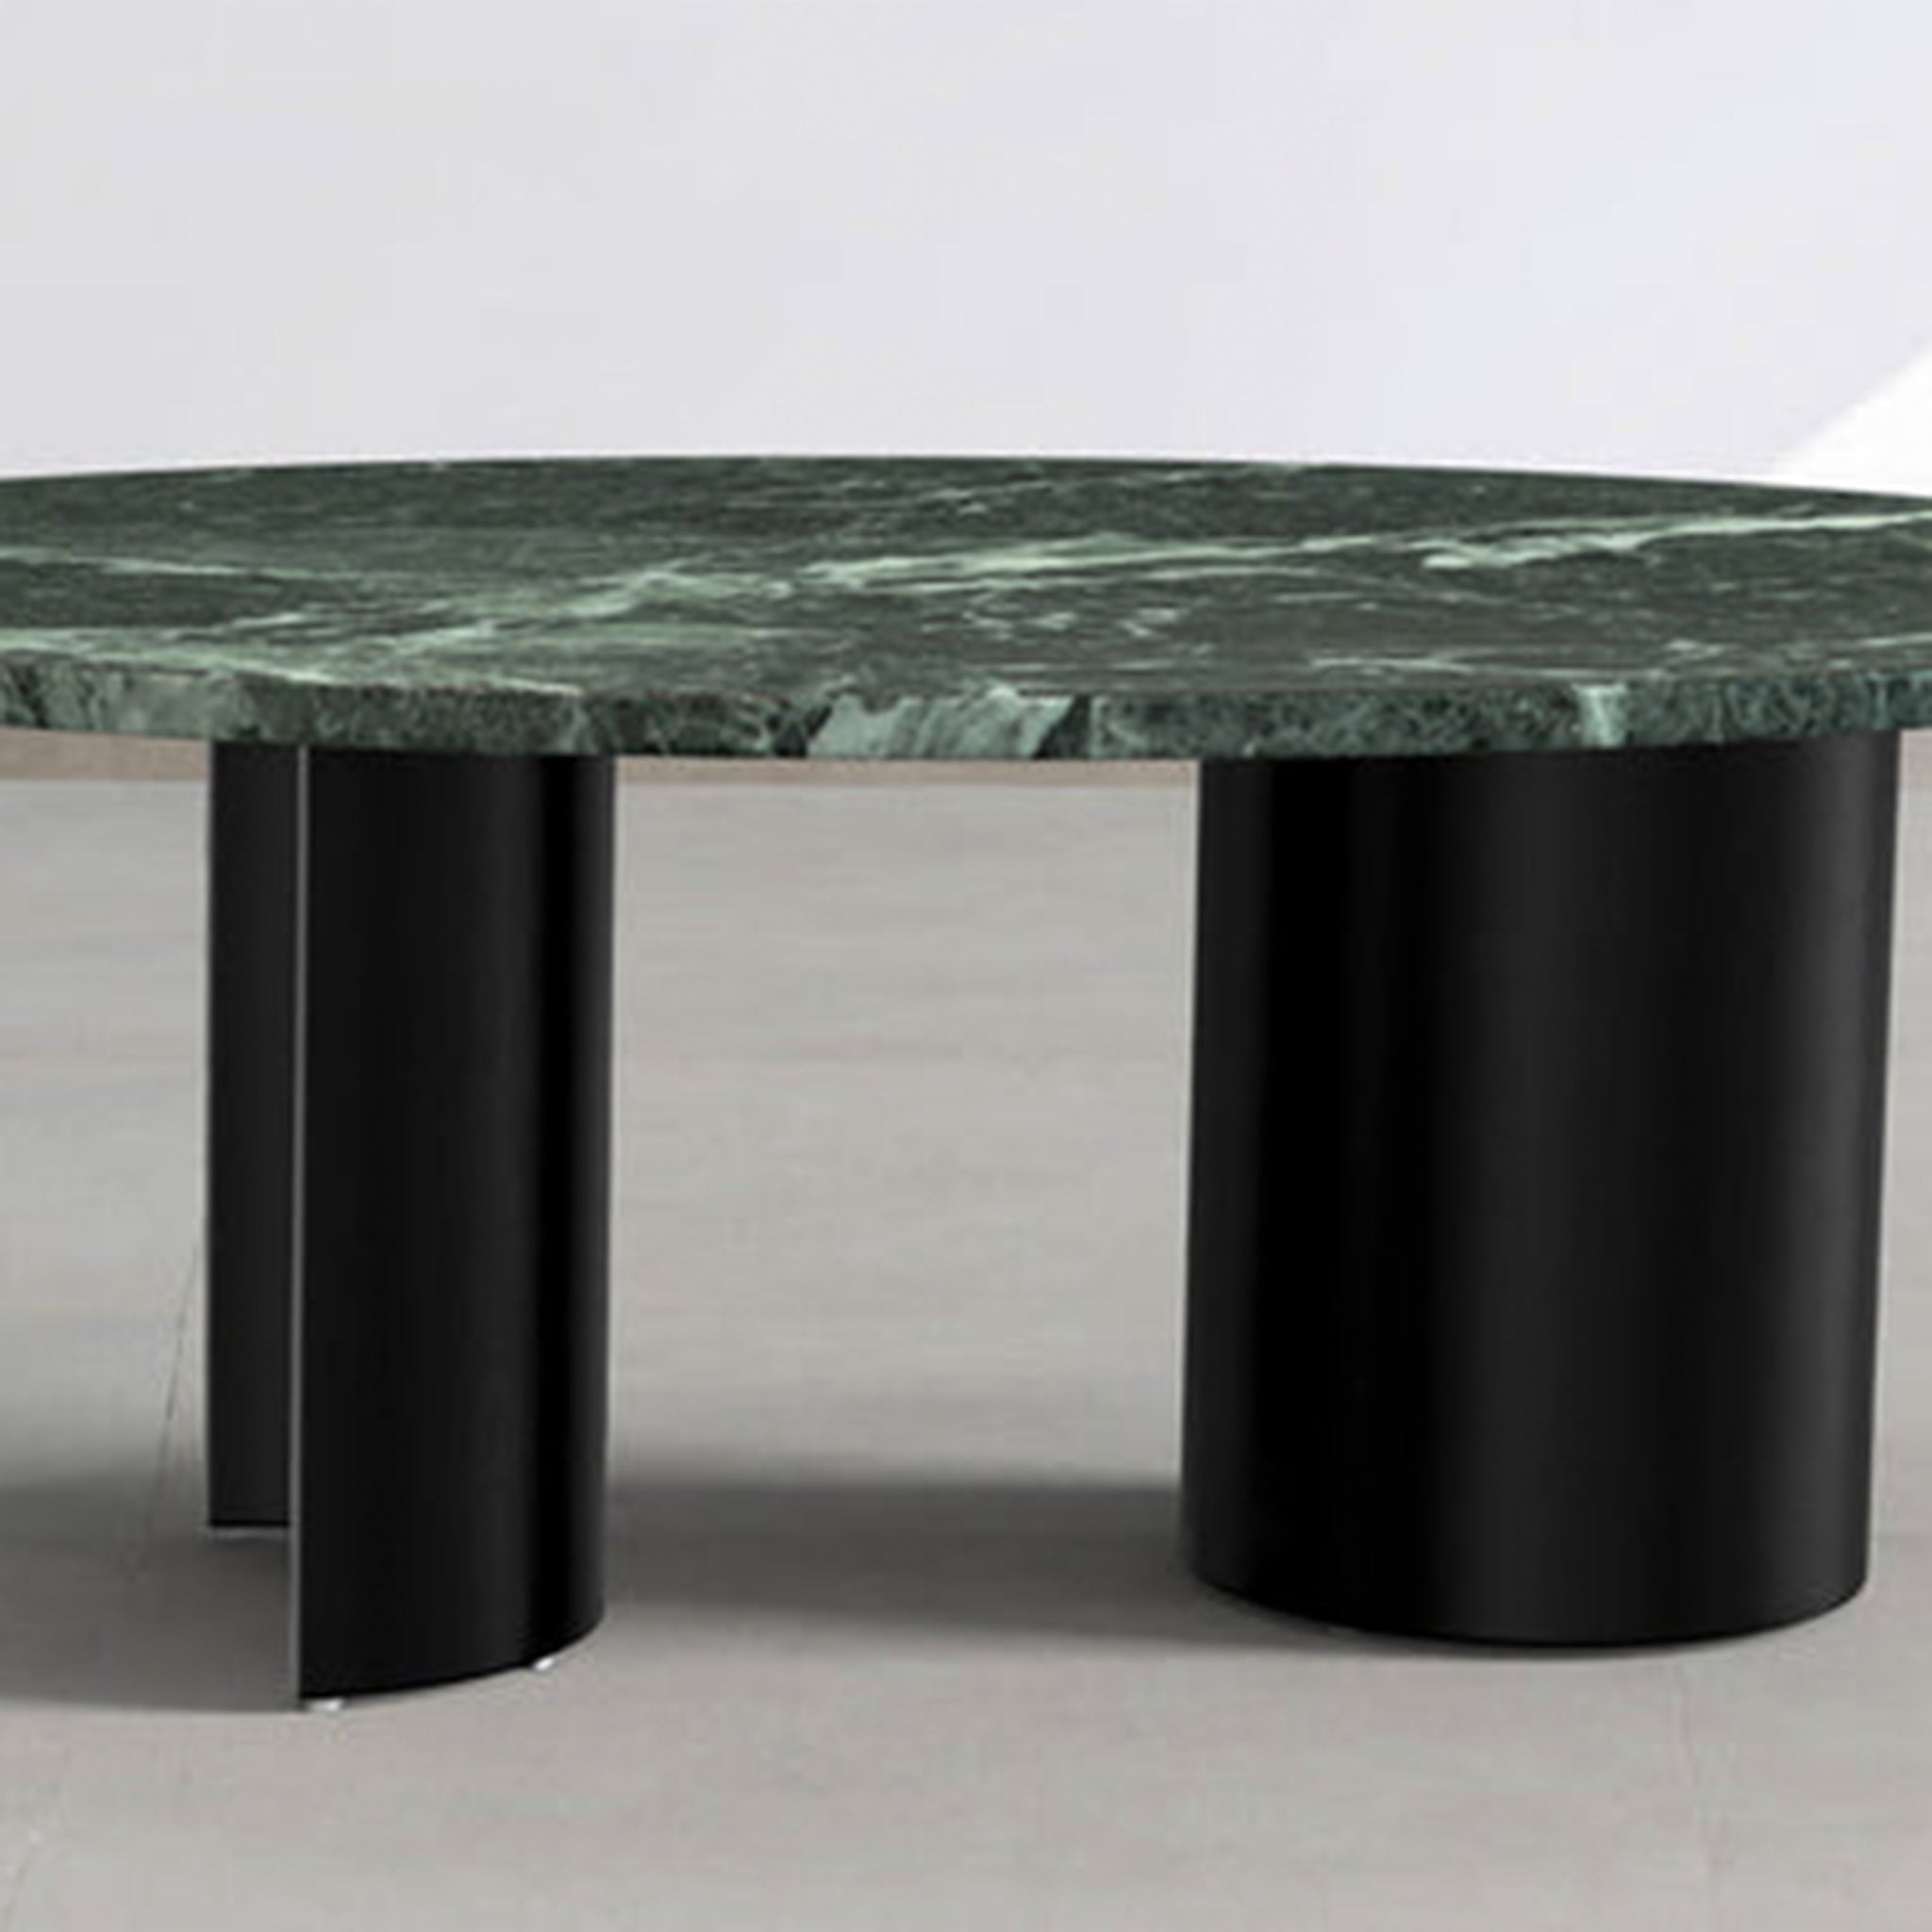 Customizable Coffee Table: Contact us for a polished or glossy finish.